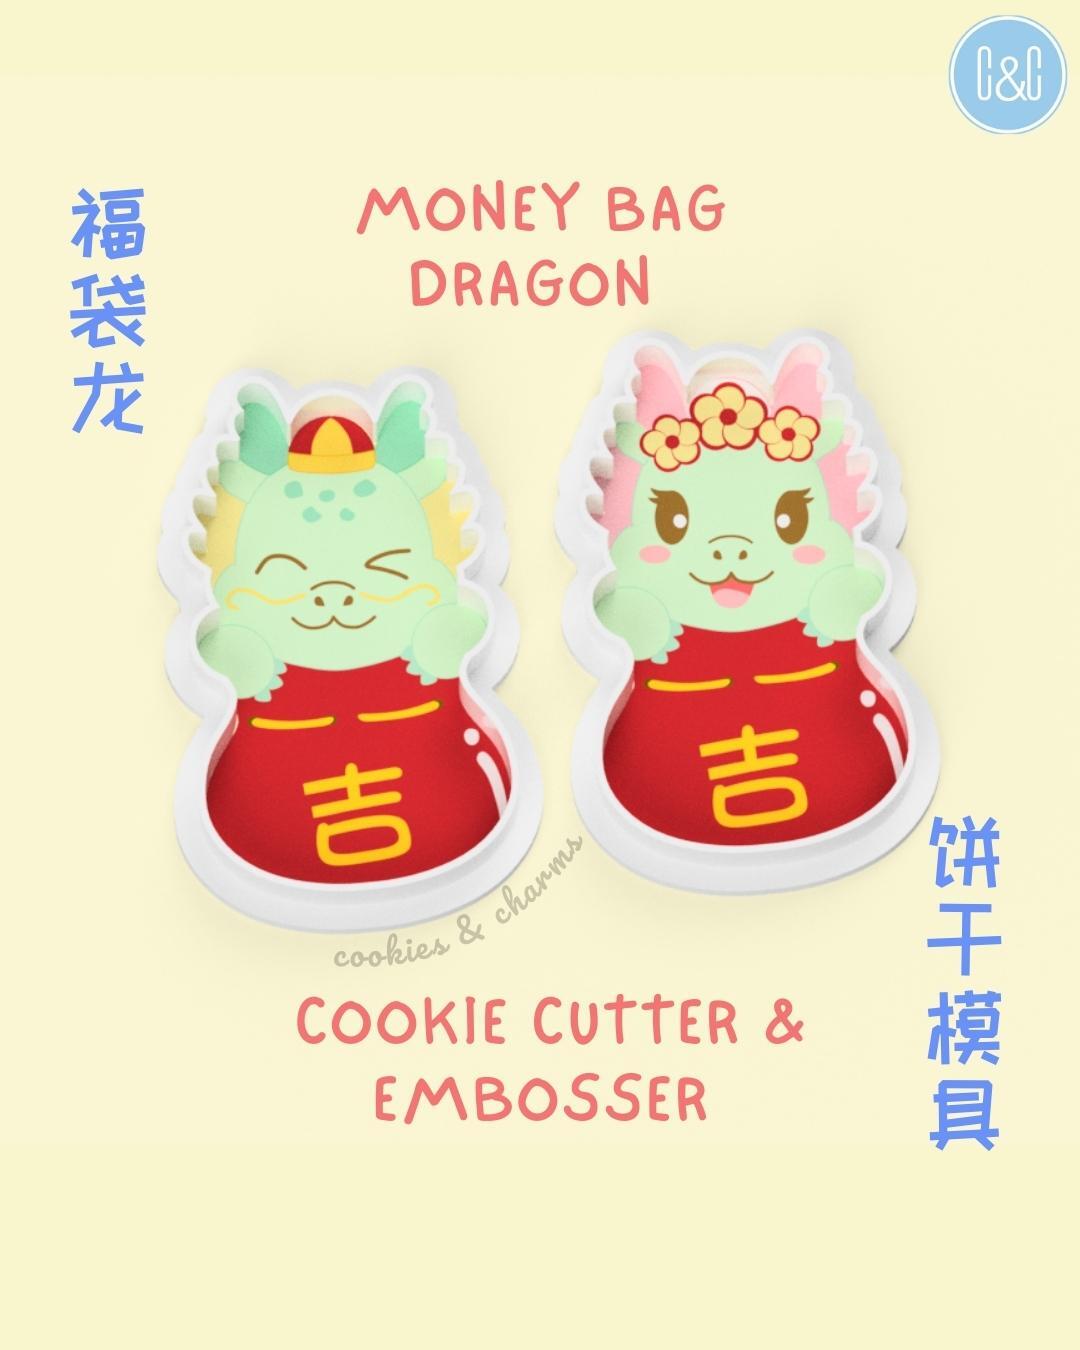 dragon money bag cookie cutter and embosser 福袋龙